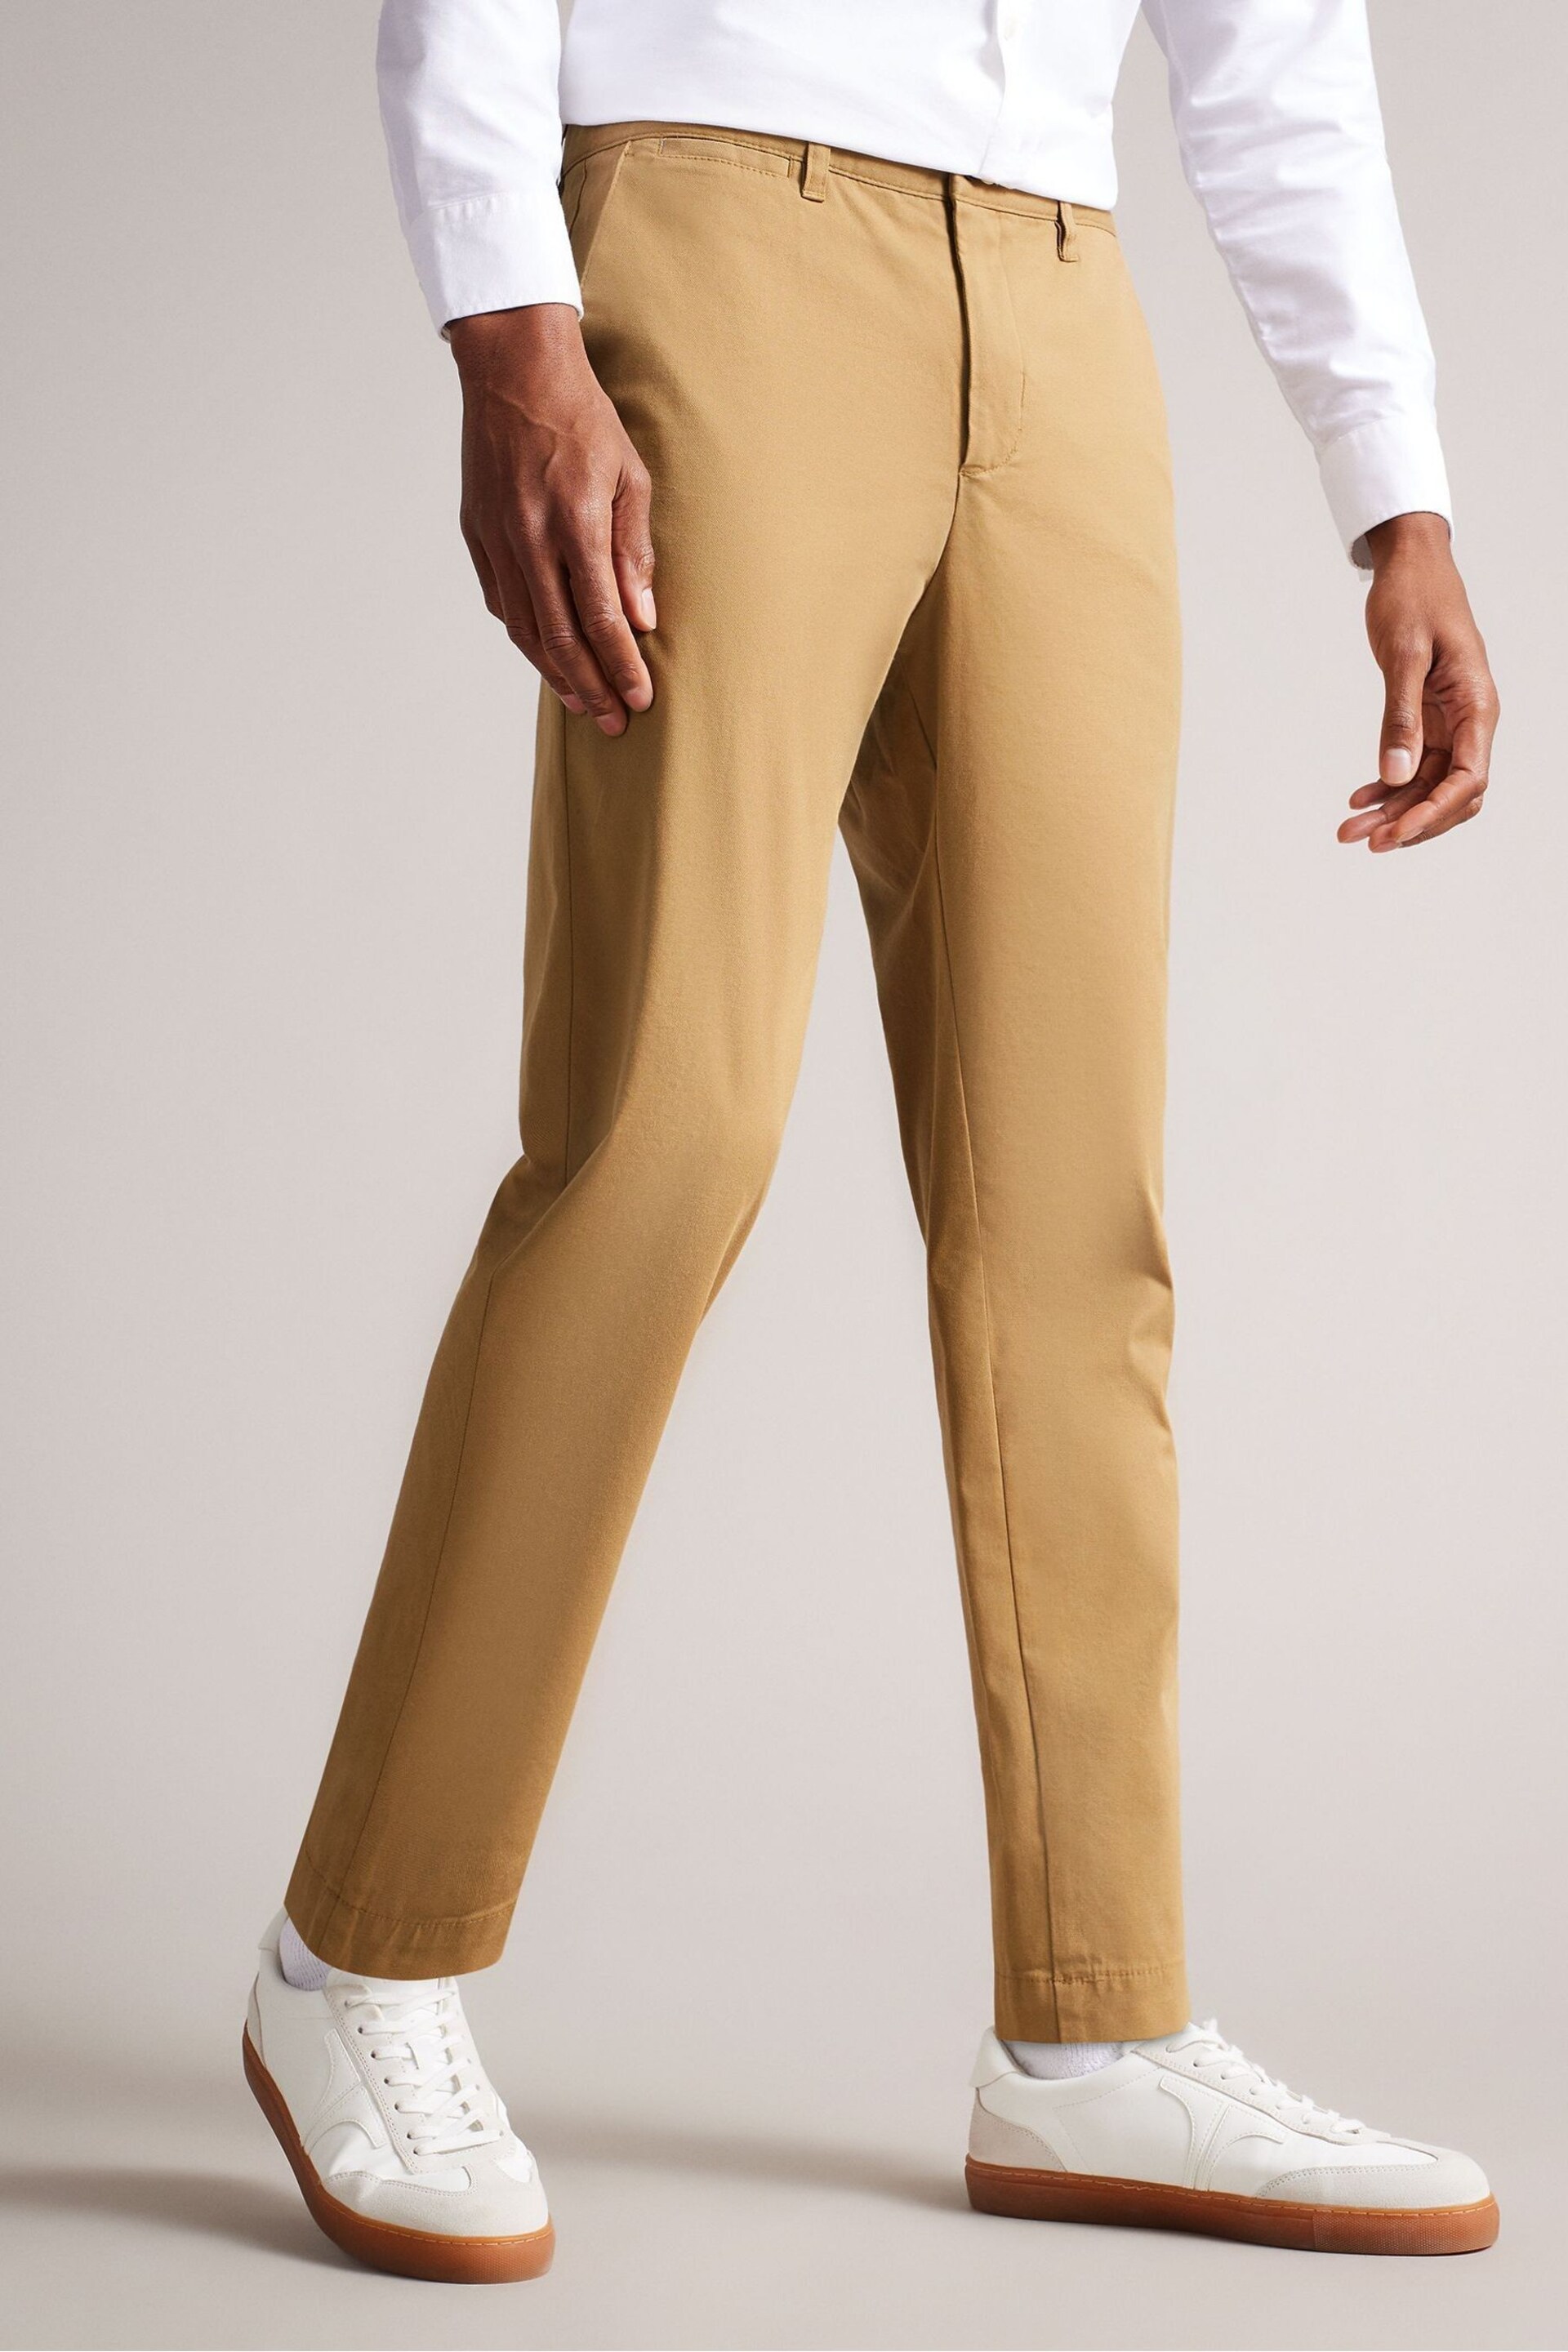 Ted Baker Natural Genbee Casual Relaxed Chinos - Image 1 of 6